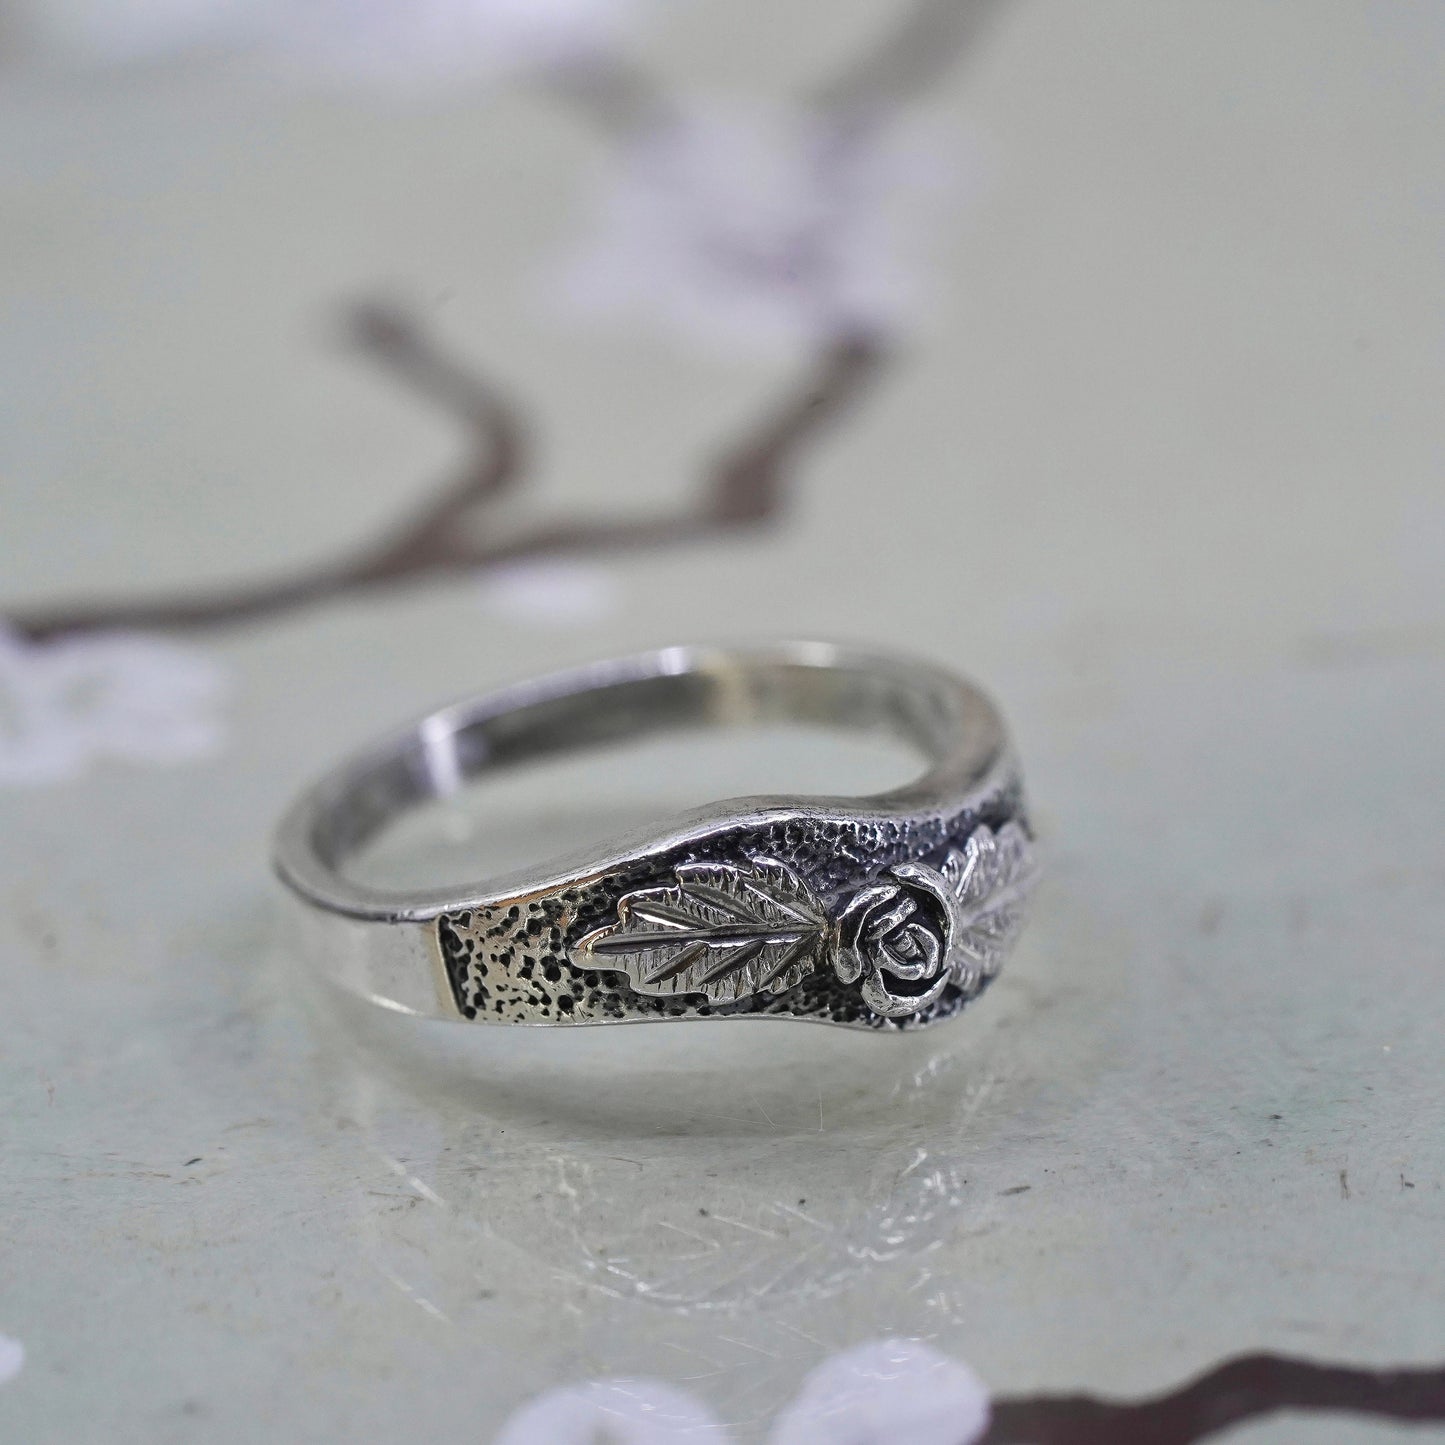 Size 7, Wheeler Co. Sterling silver handmade ring, 925 band with rose flower